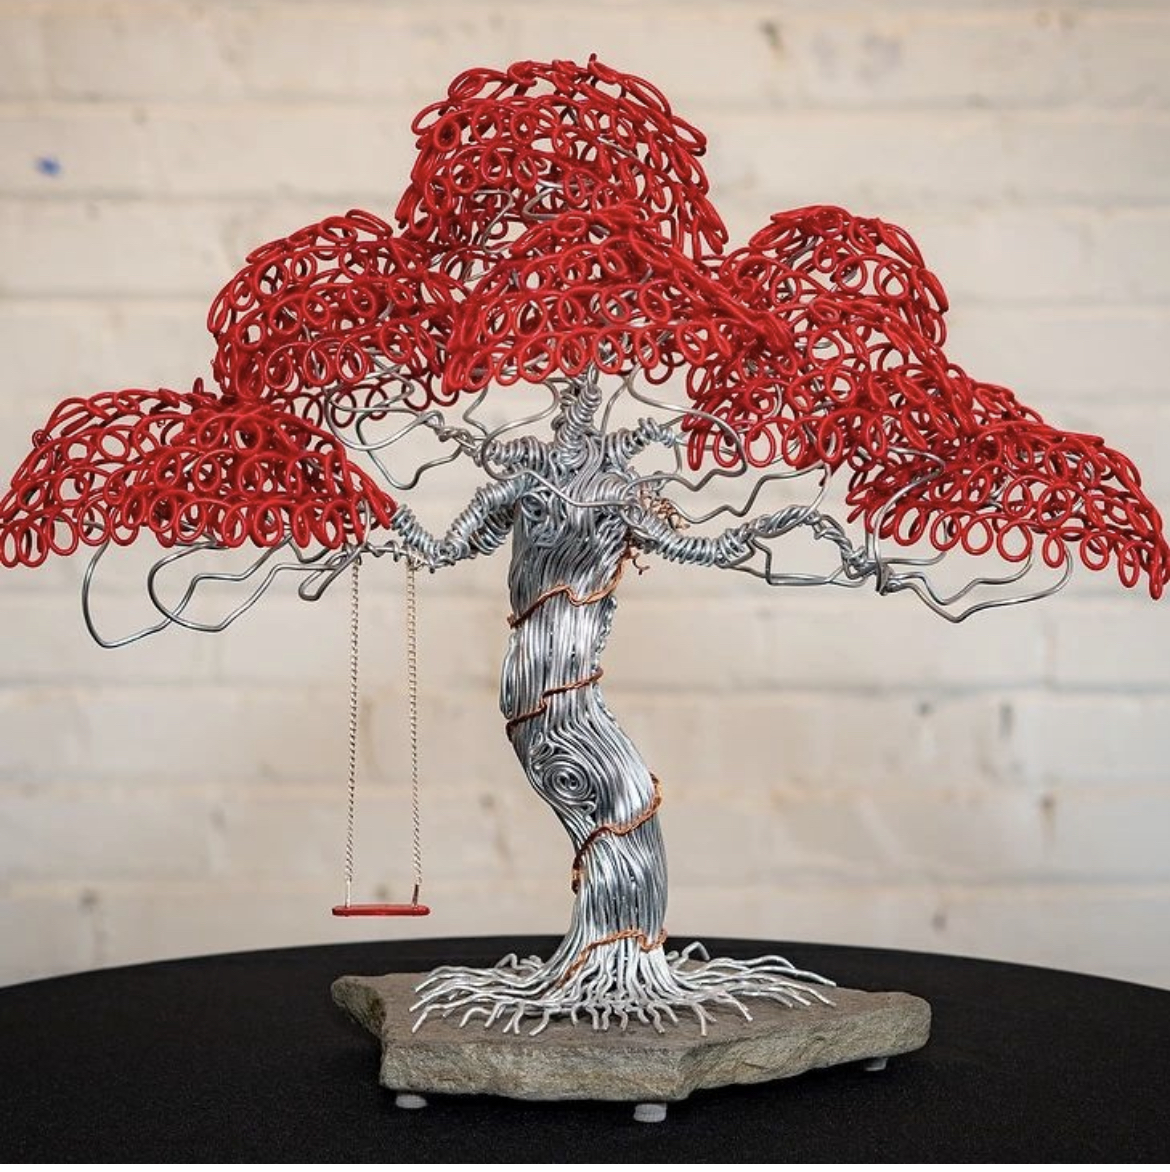 Second Saturday in the RAD - Wire Sculpture Demo by Claudia Moore Field  Art! - River Arts District Artists